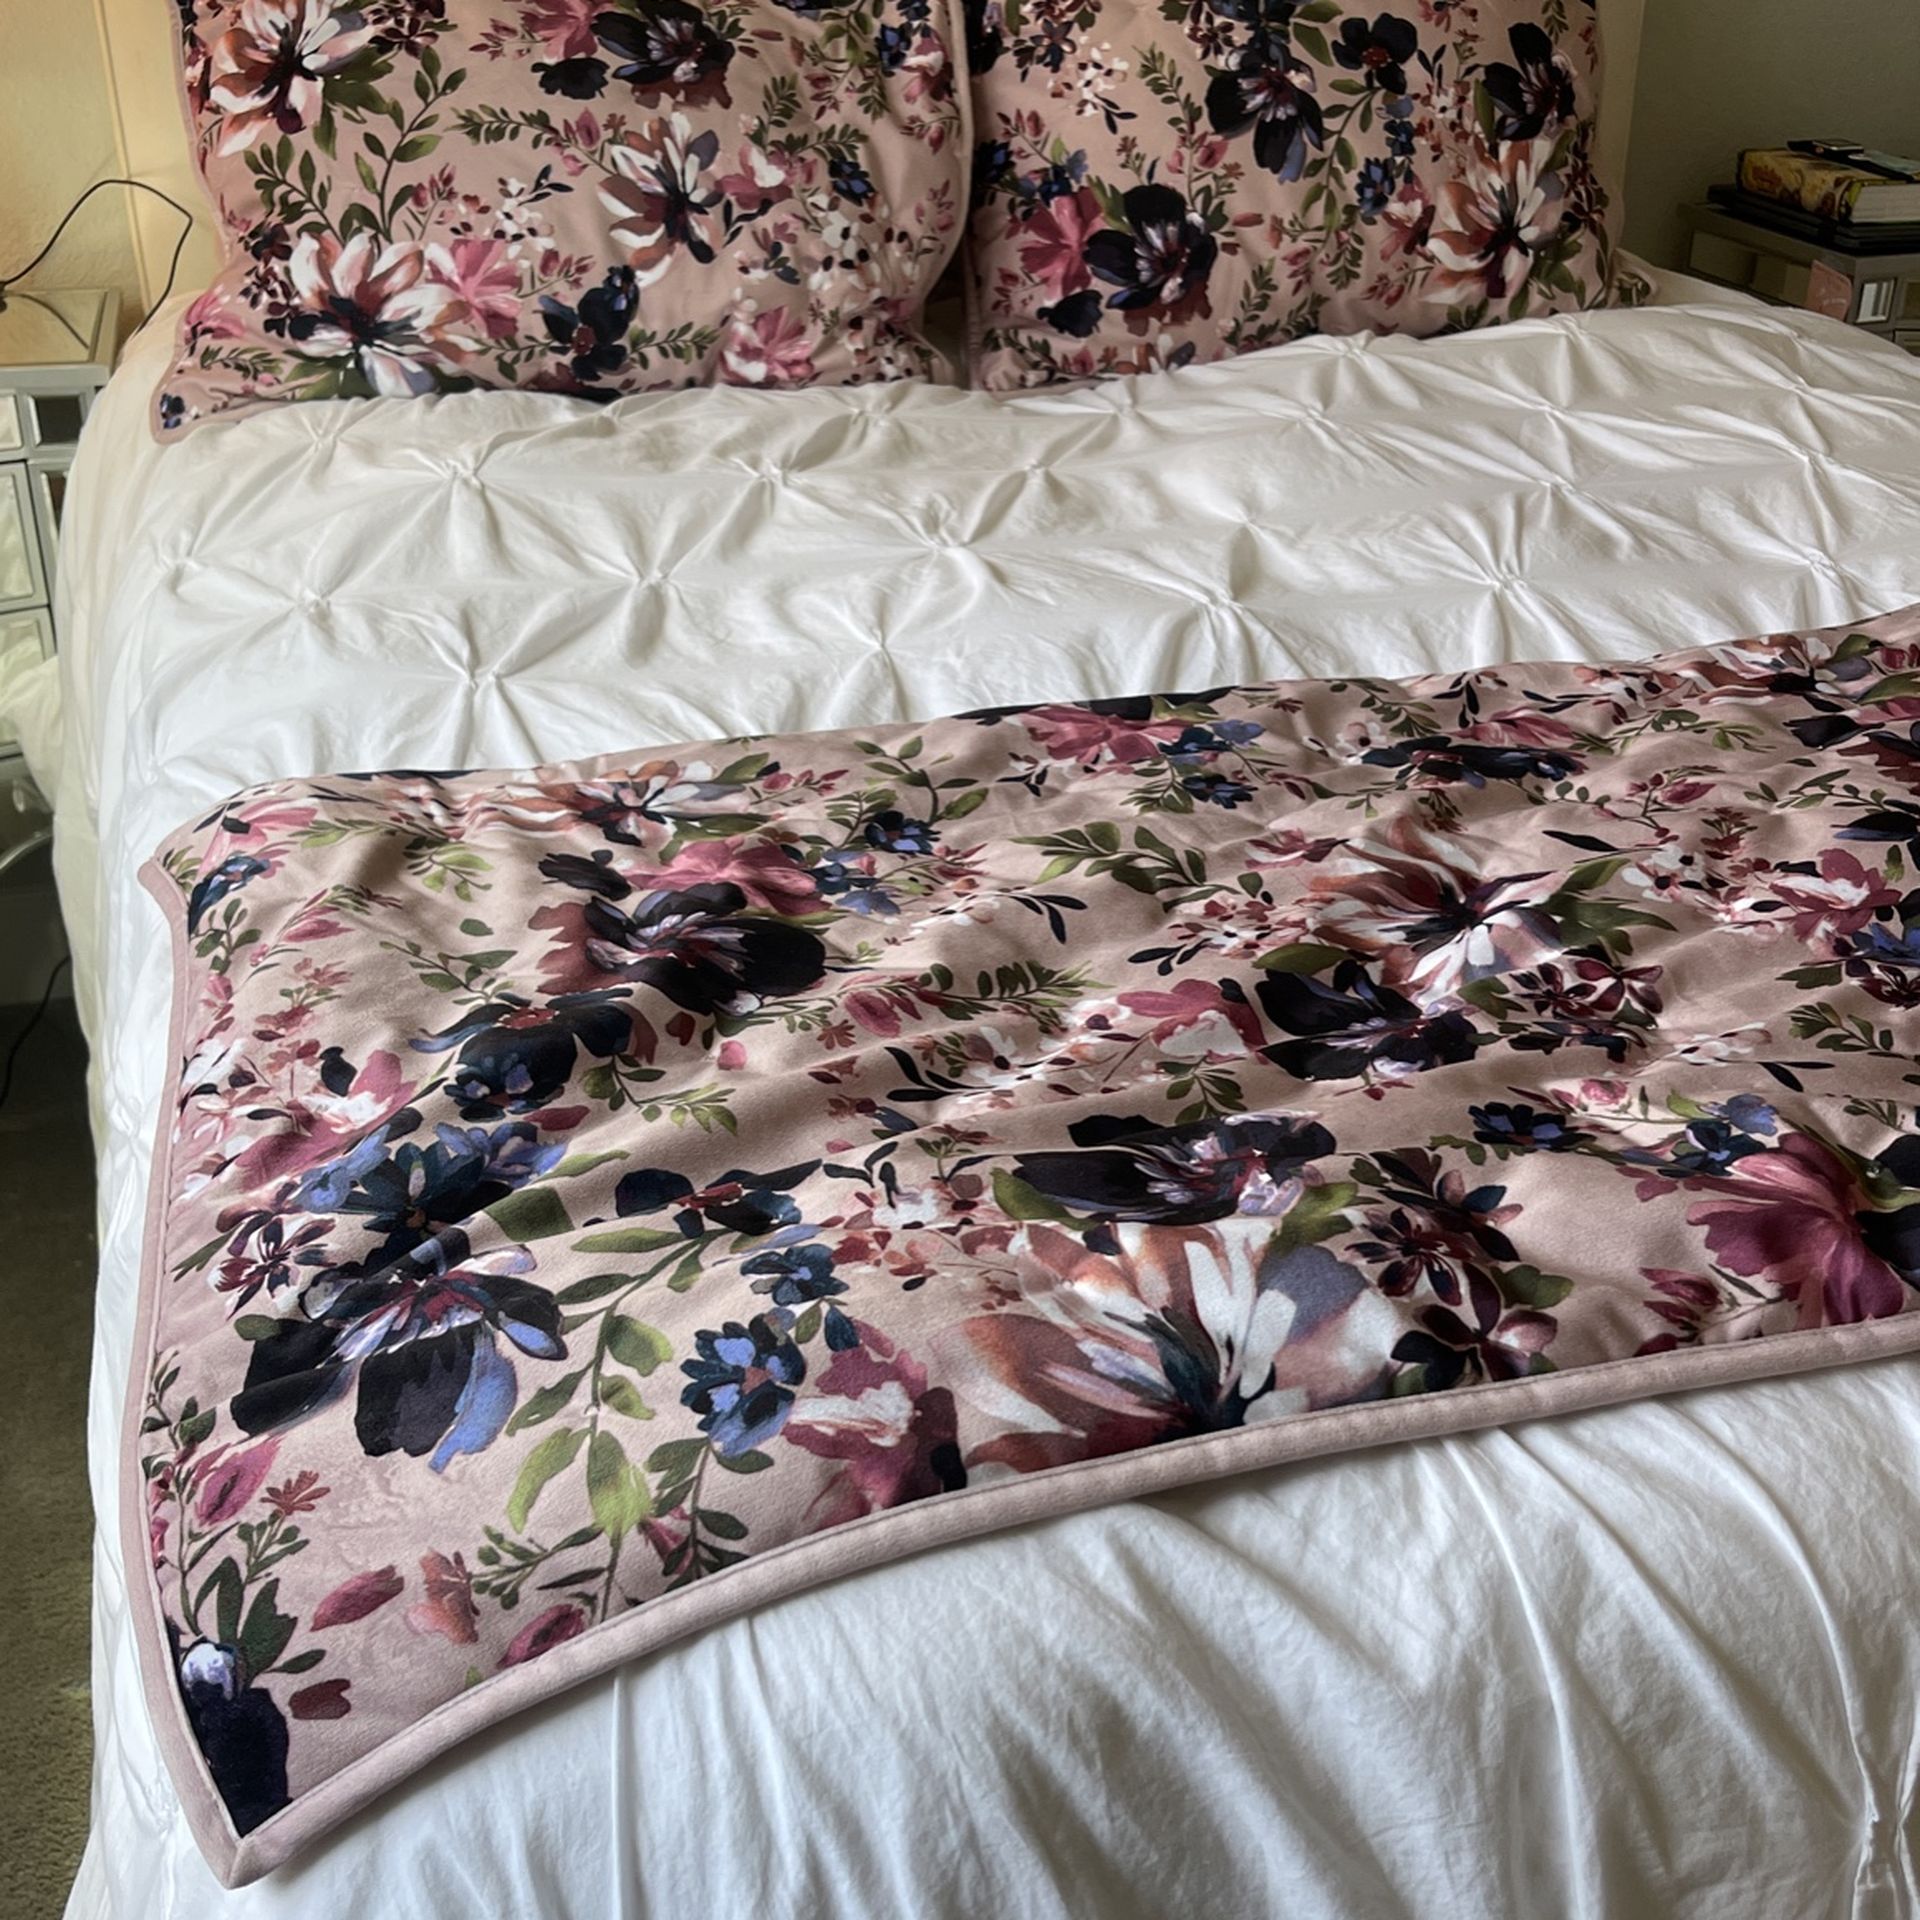 Velvet Floral Throw + 2 Decorative Pillow Cases To Match 